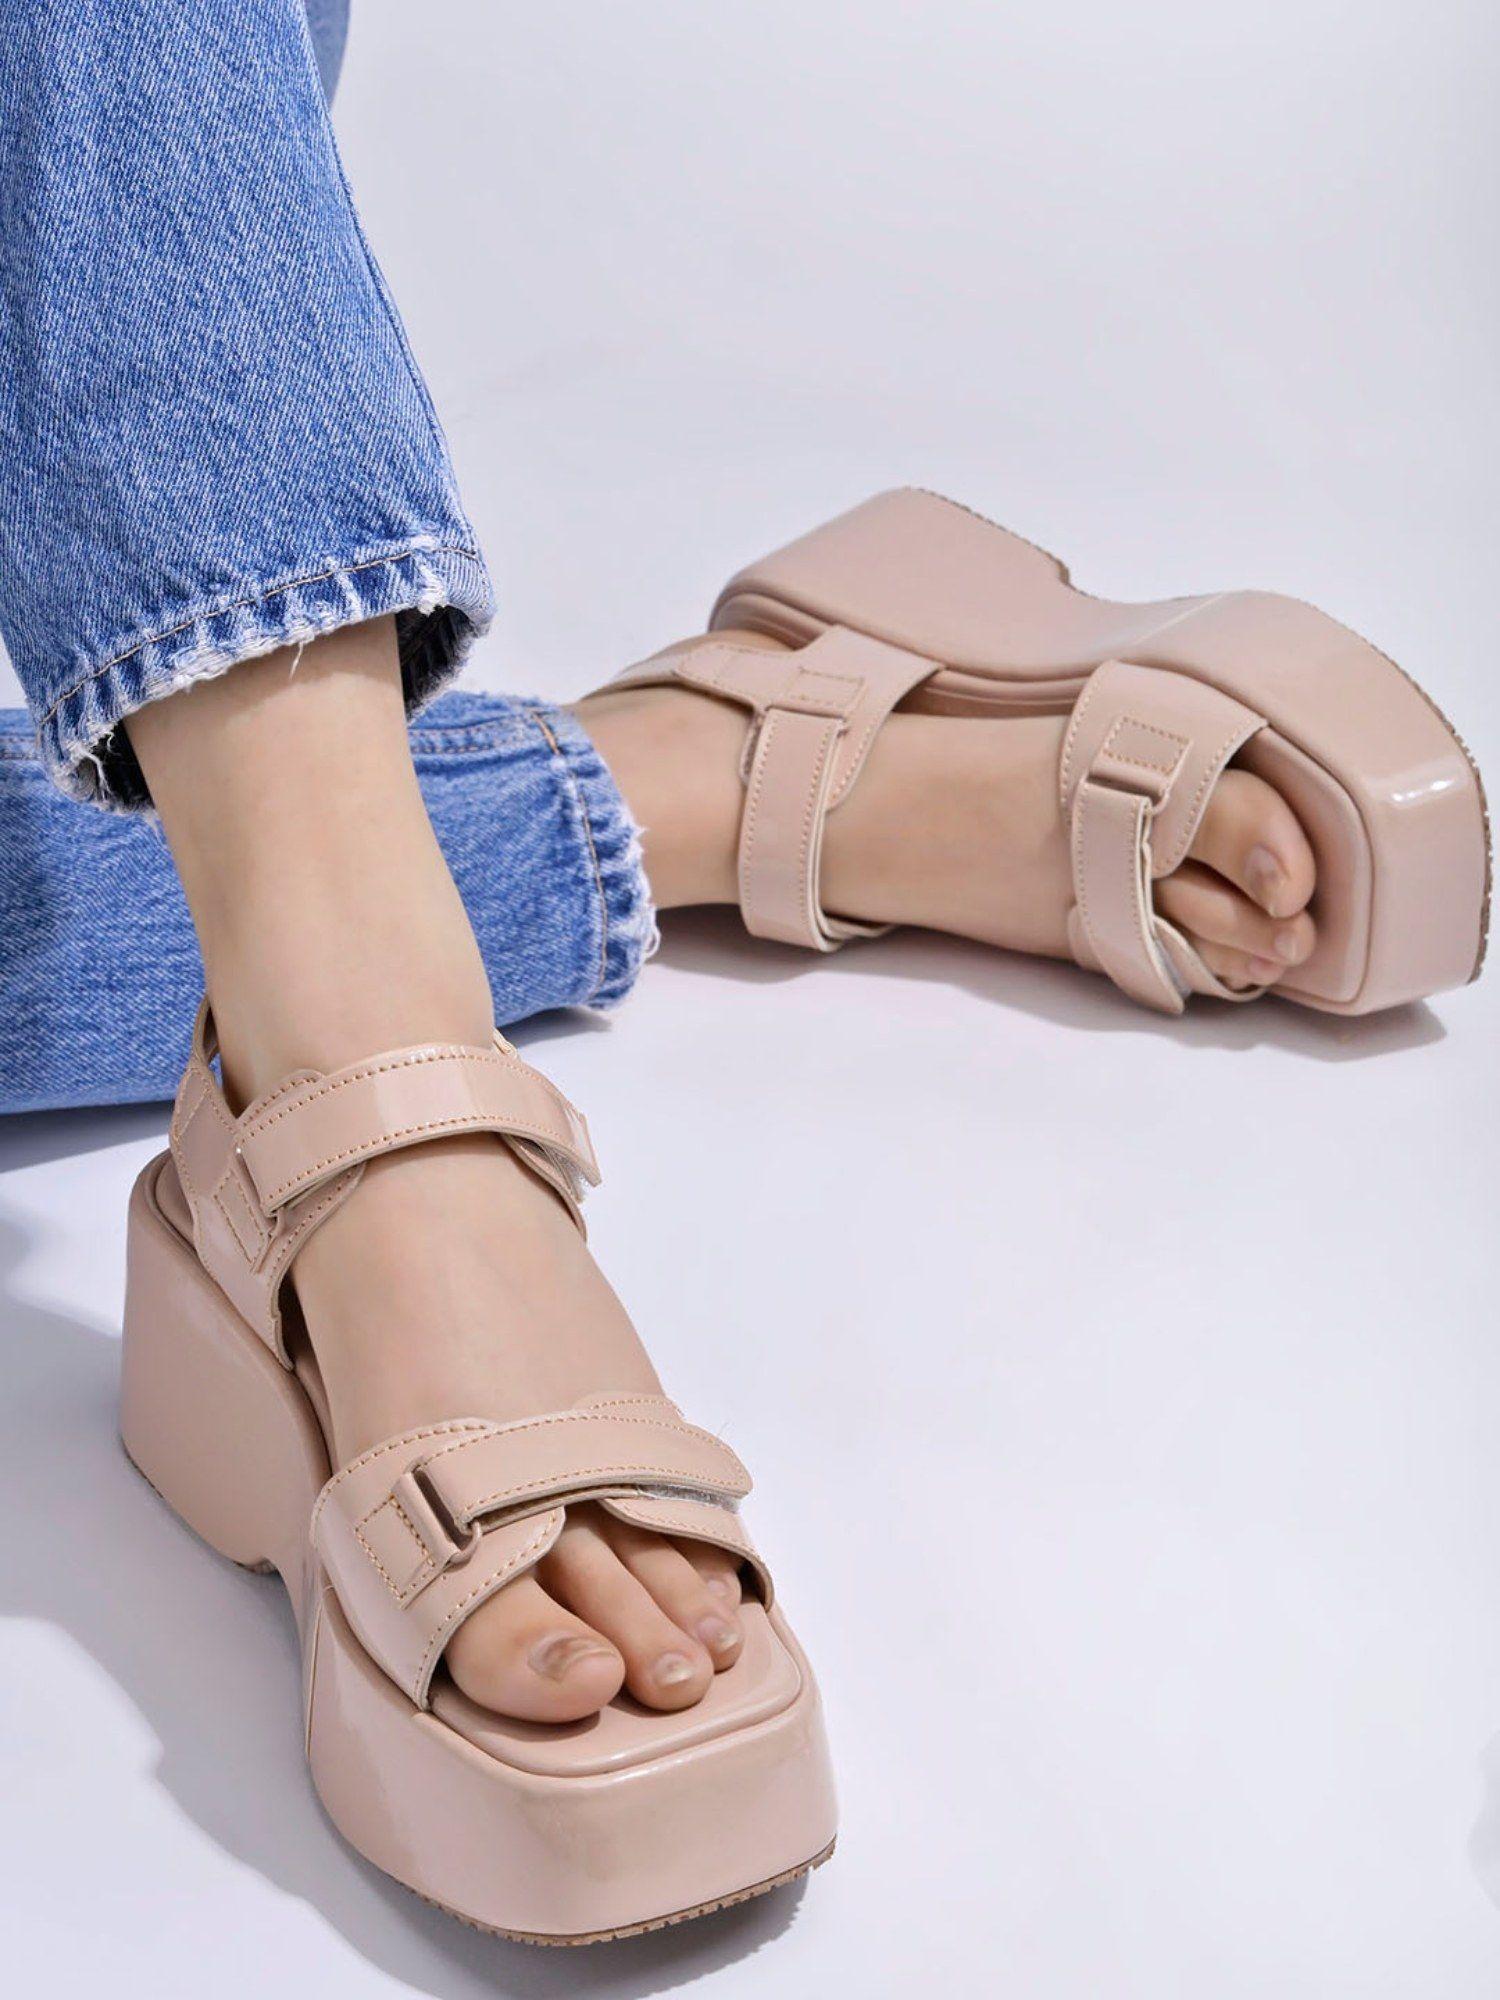 comfortable & sporty peach wedge heels for women